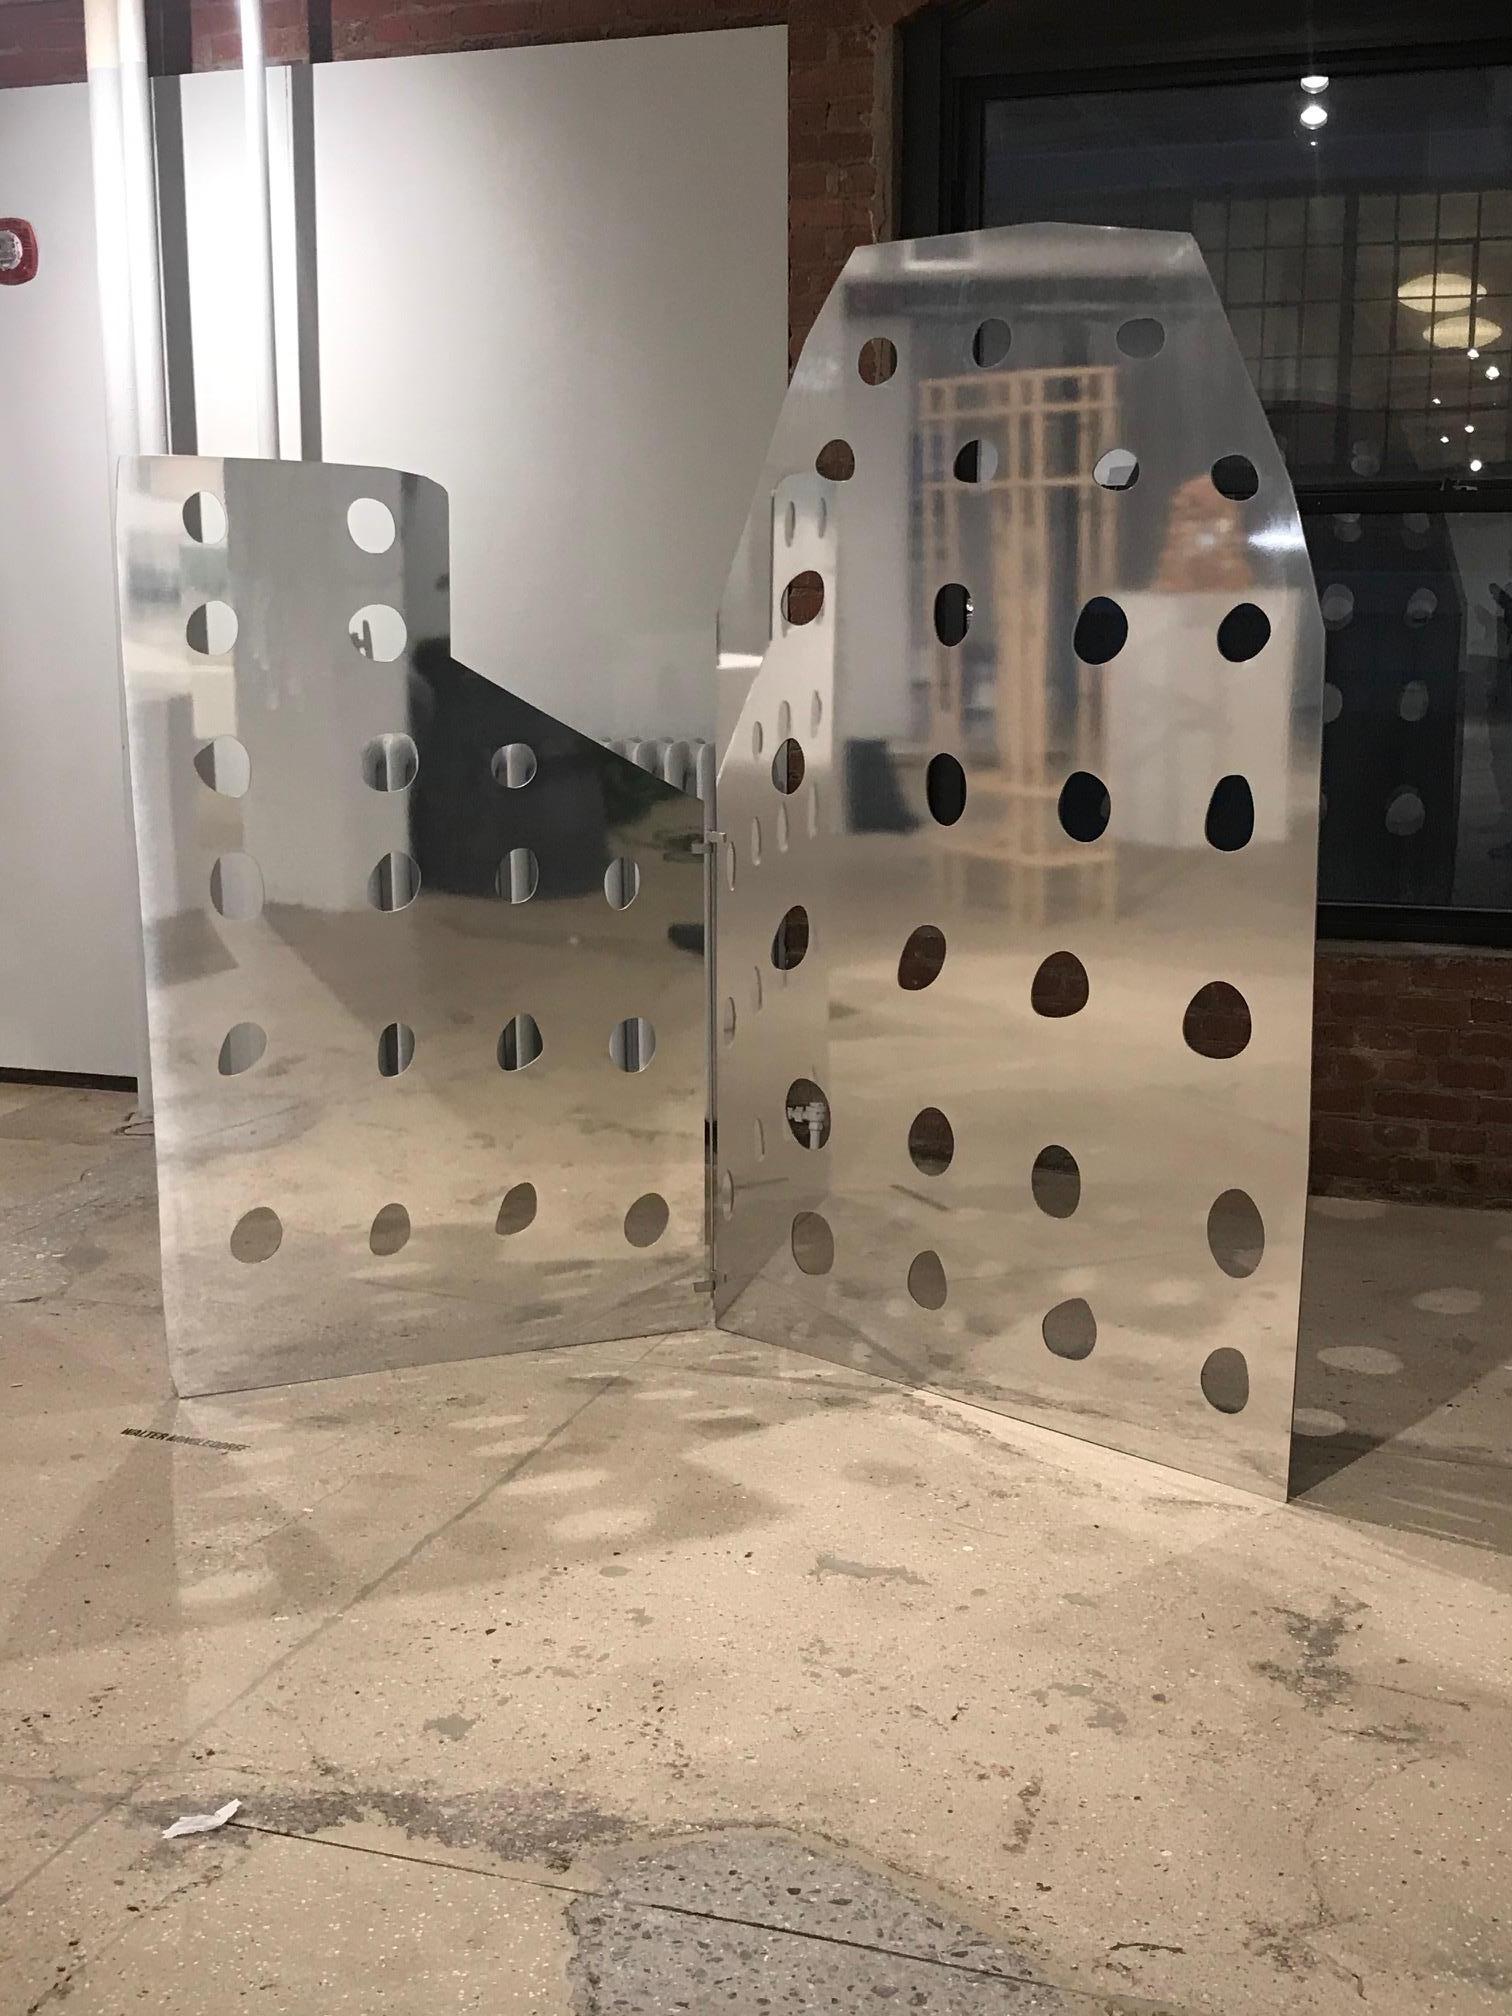 By using pastel sketches as construction drawings a series of mirrored aluminum screens  are created from the recollection of buildings and areas of endearment. A feeling of nostalgia is created as the childlike drawings are enlarged and taken off